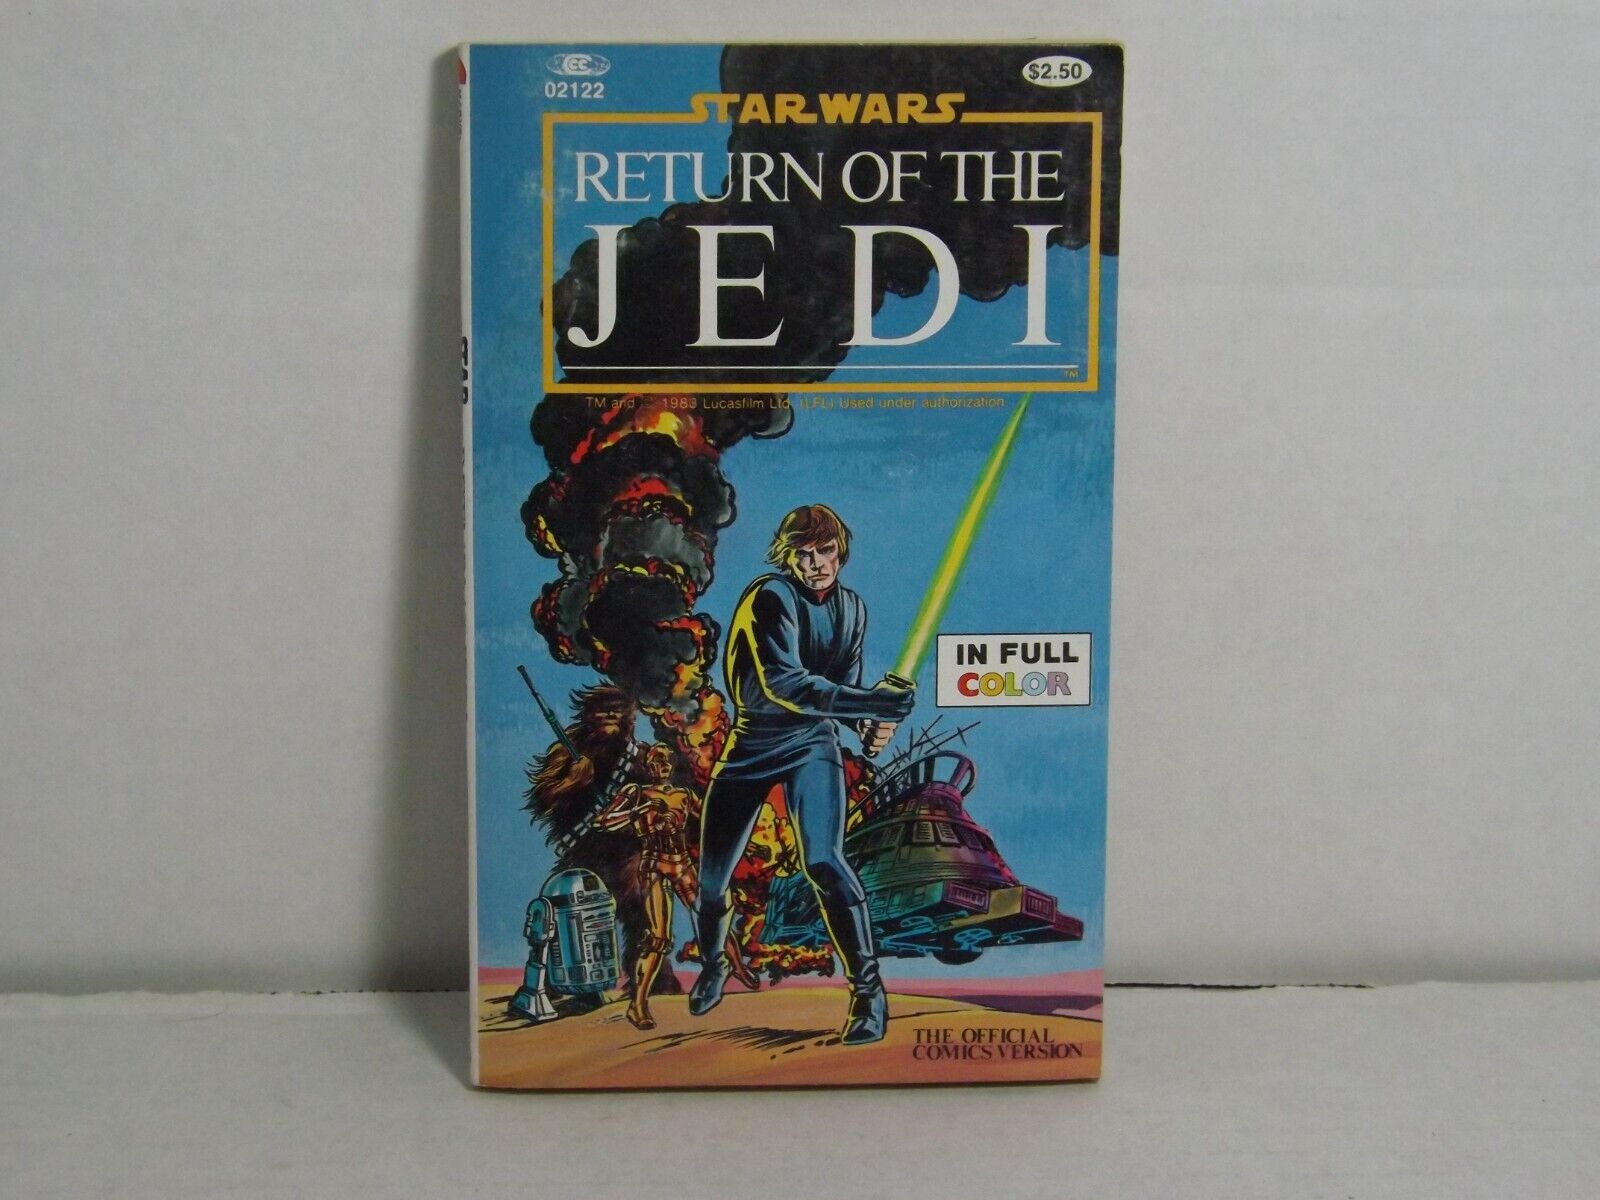 Marvel Graphic Novel Return of the Jedi First Edition Comic Book Digest Size